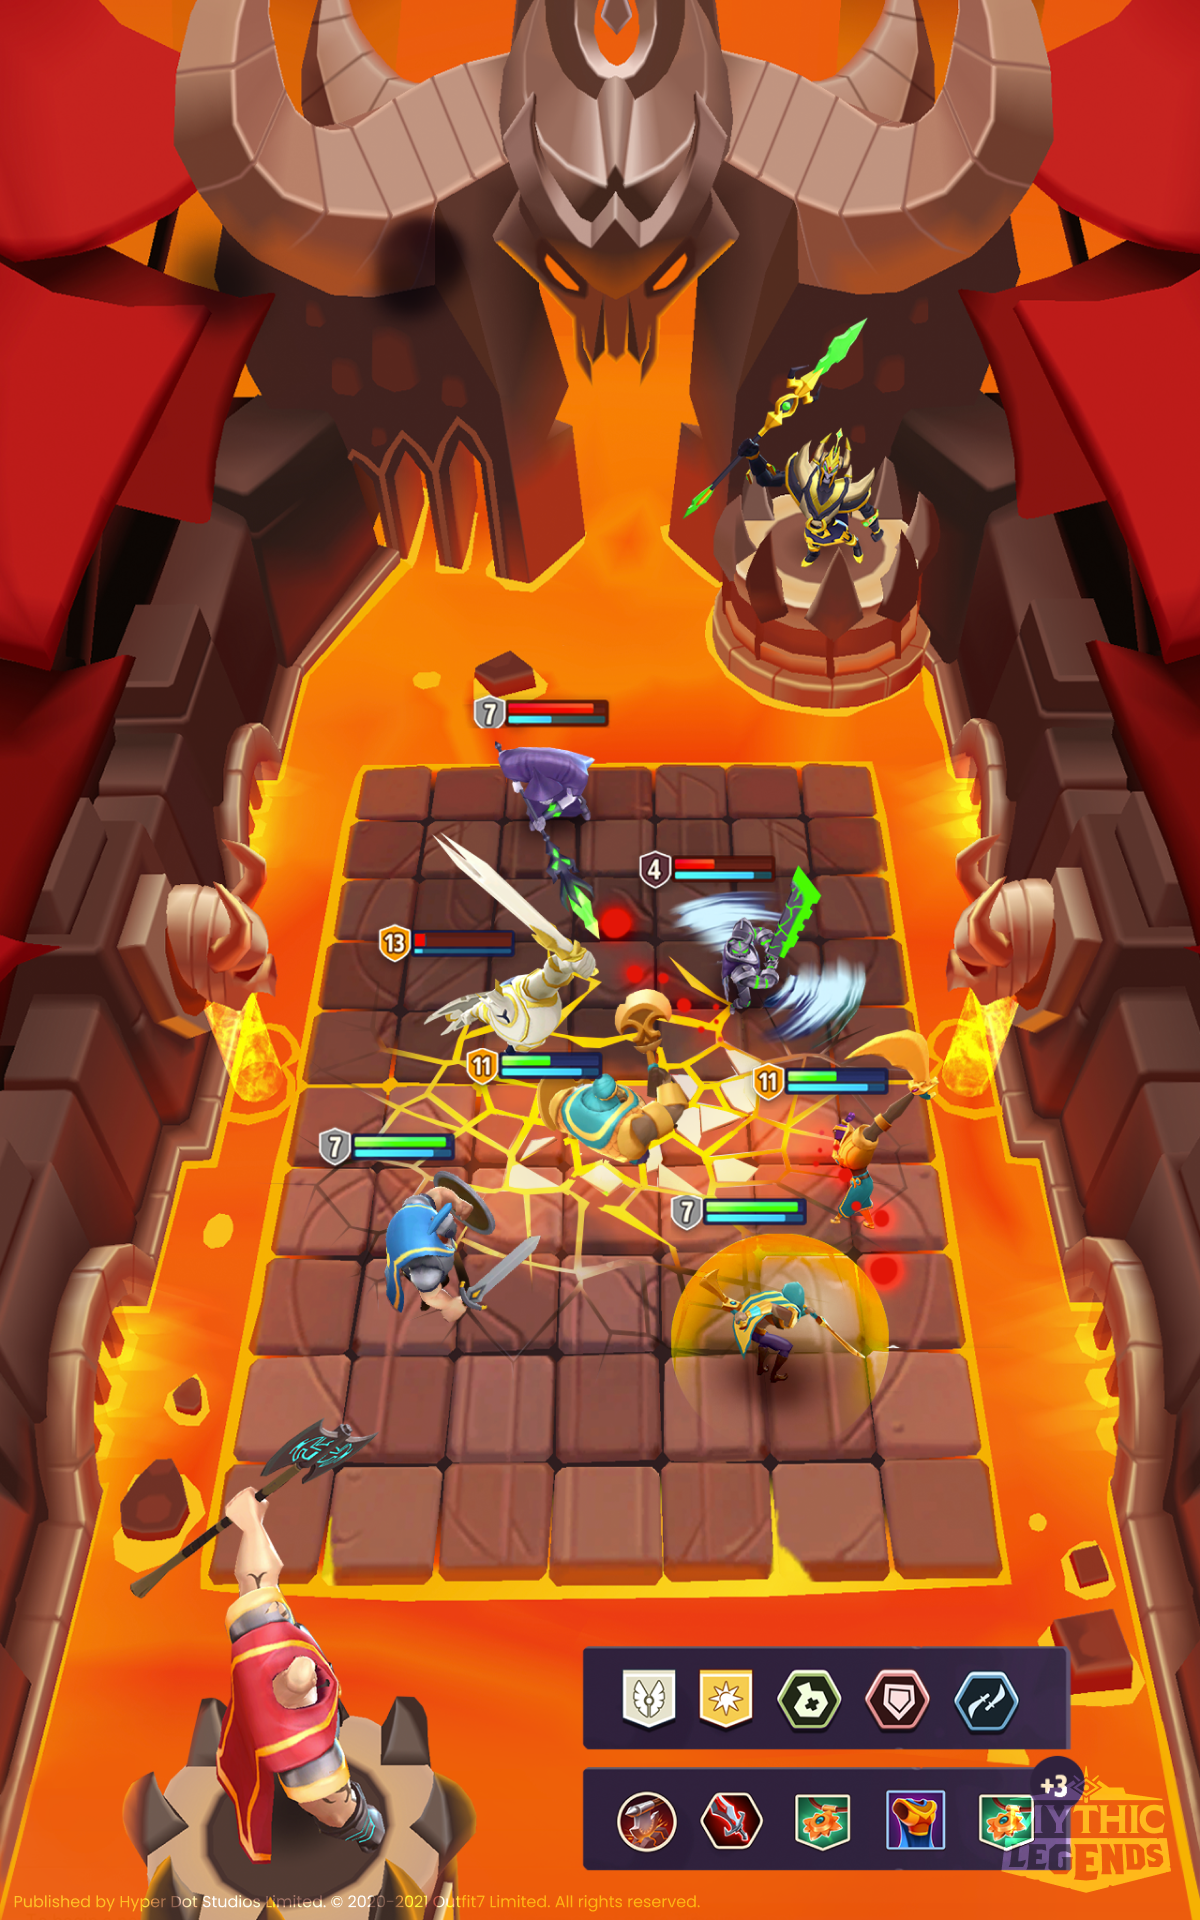 Mythic Legends gameplay screenshot on mobile.